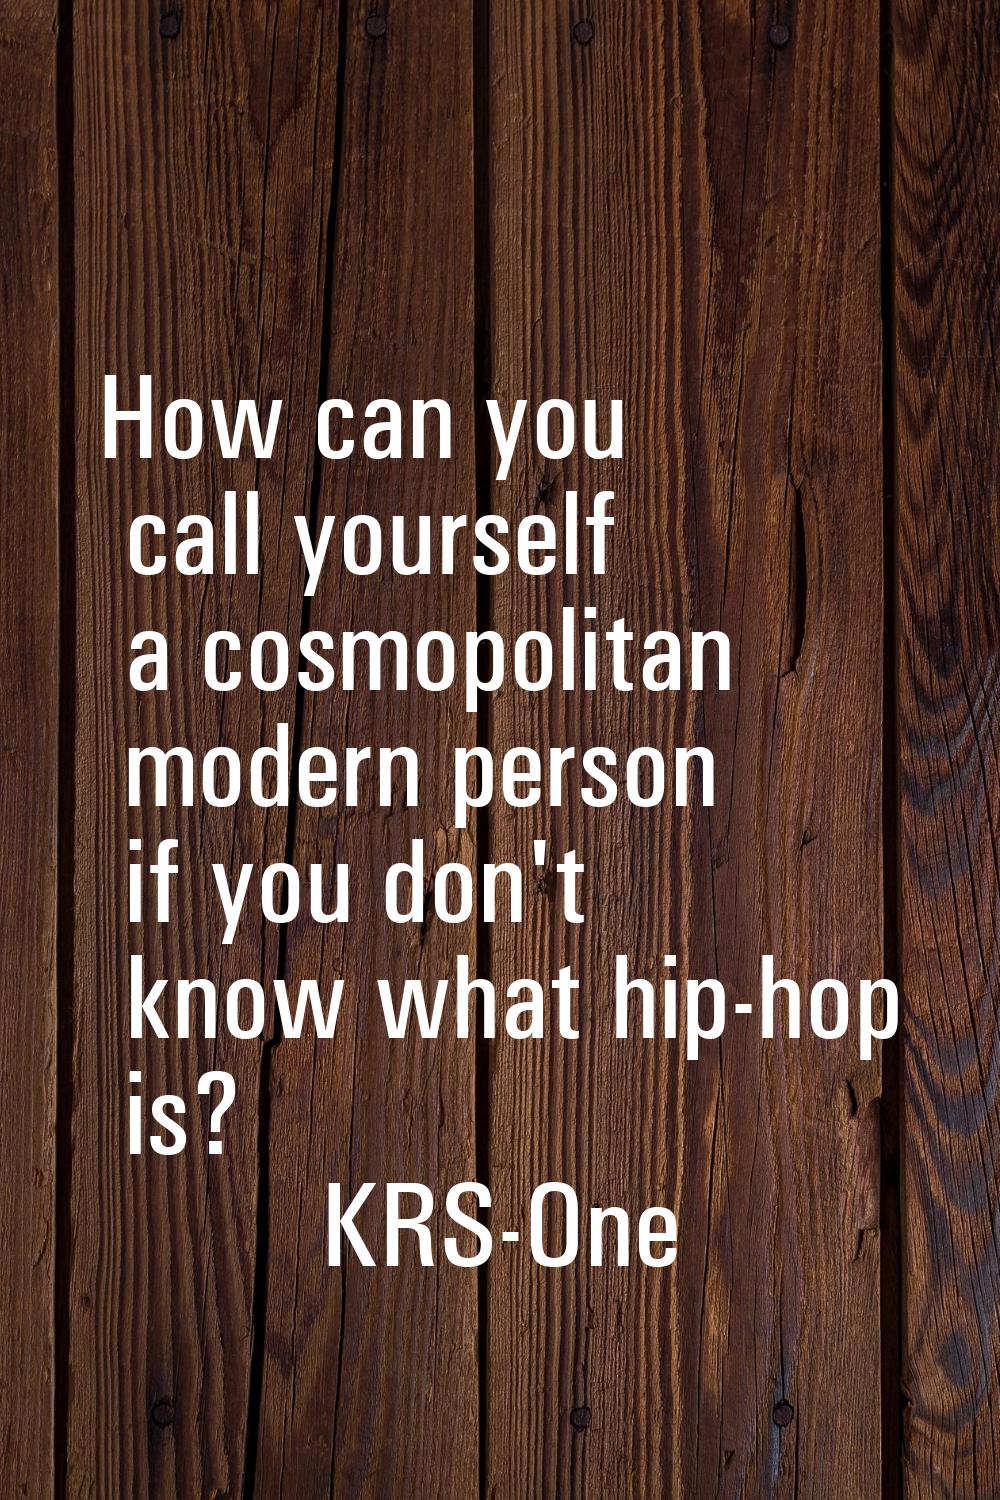 How can you call yourself a cosmopolitan modern person if you don't know what hip-hop is?